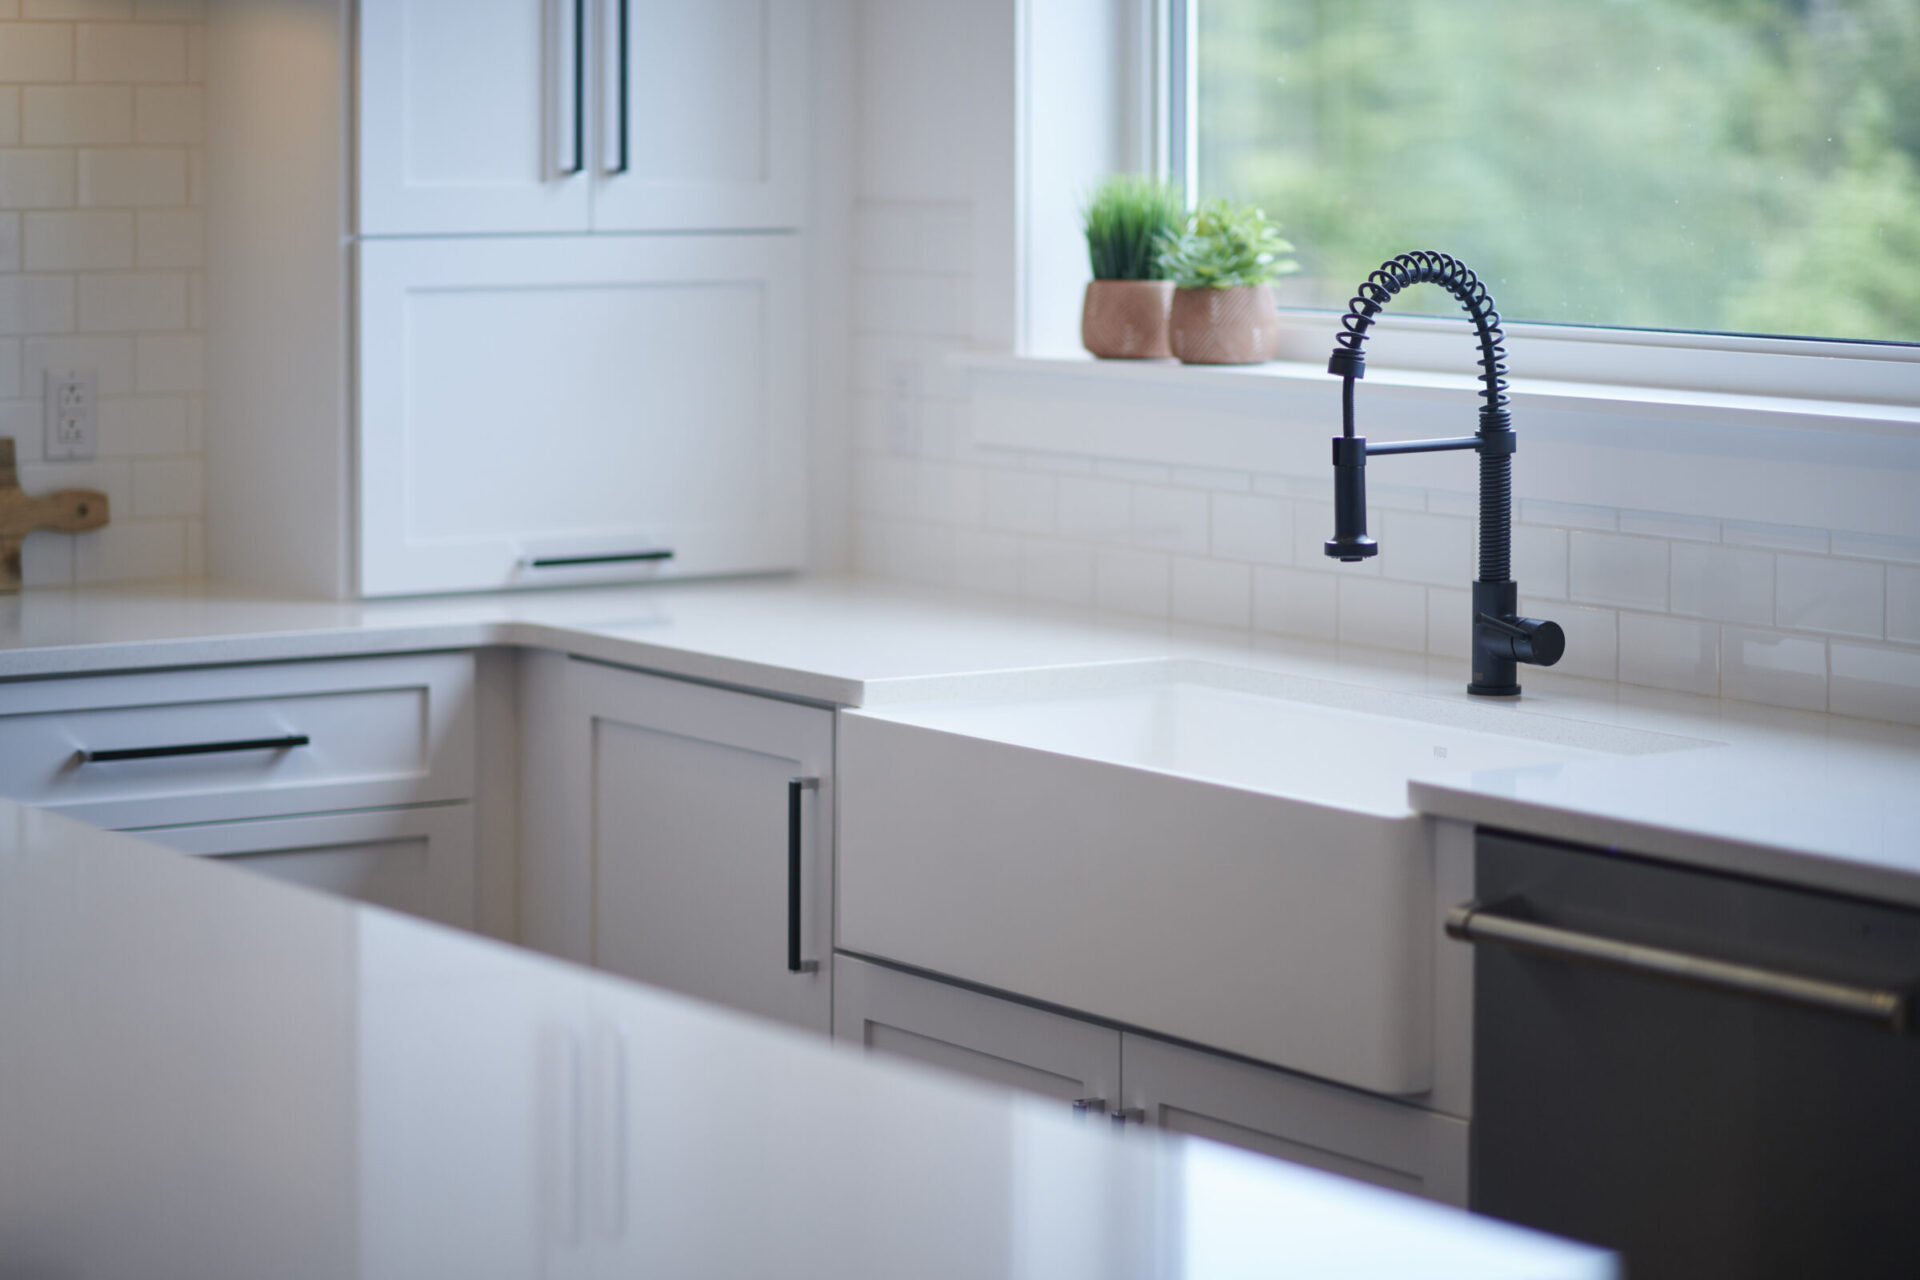 A modern kitchen interior featuring a white countertop, black faucet, subway tile backsplash, white cabinets, and a potted plant by the window.